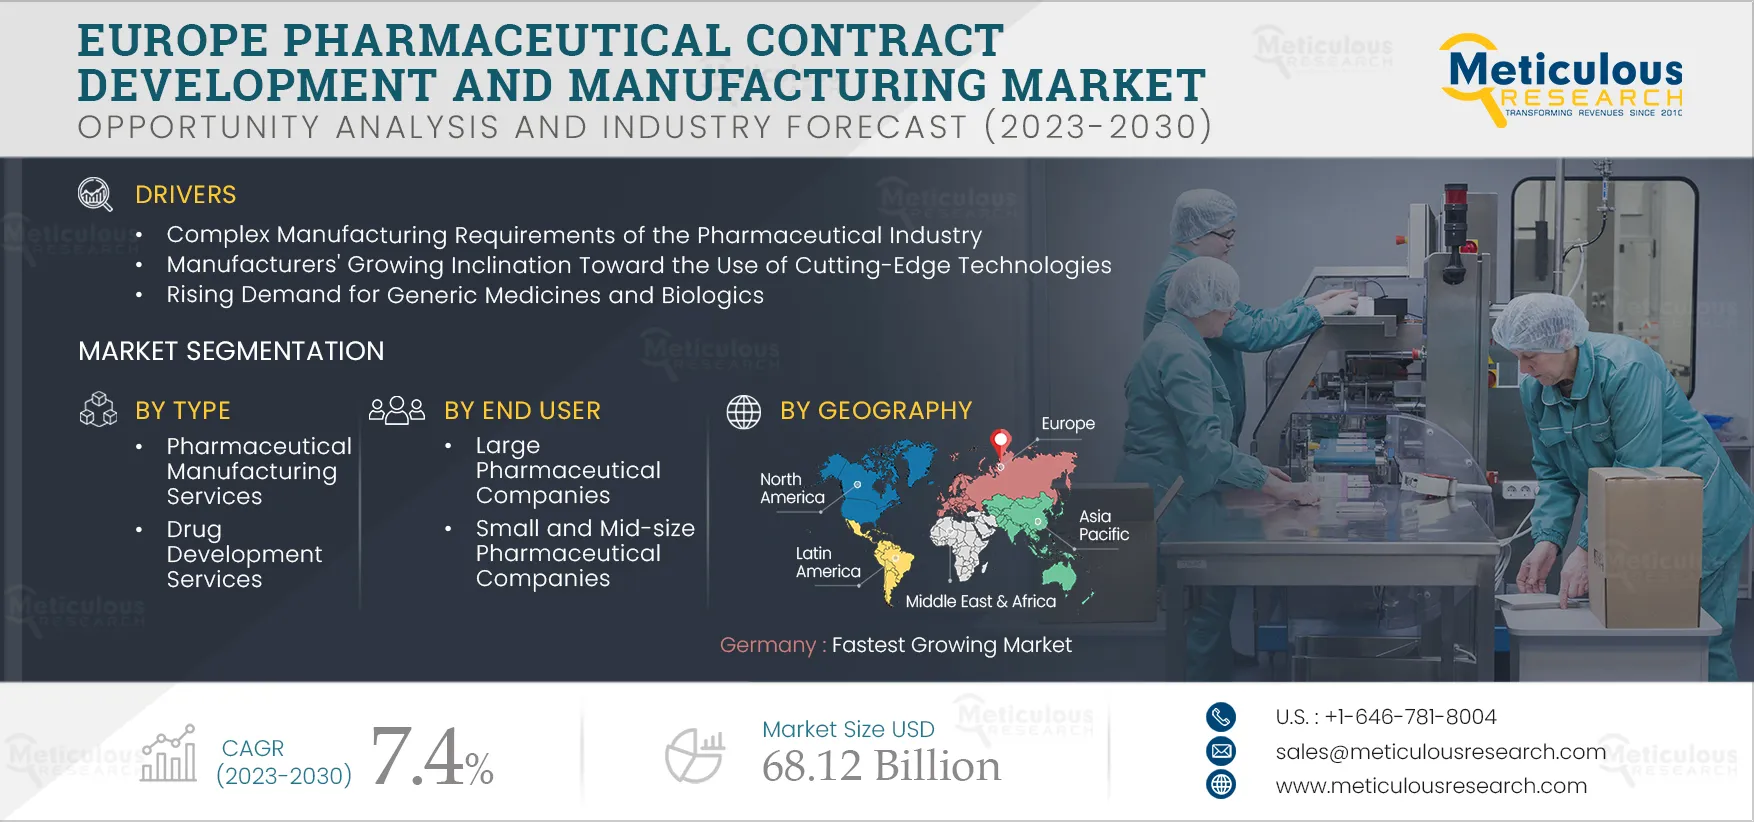 Europe Pharmaceutical Contract Development and Manufacturing Market